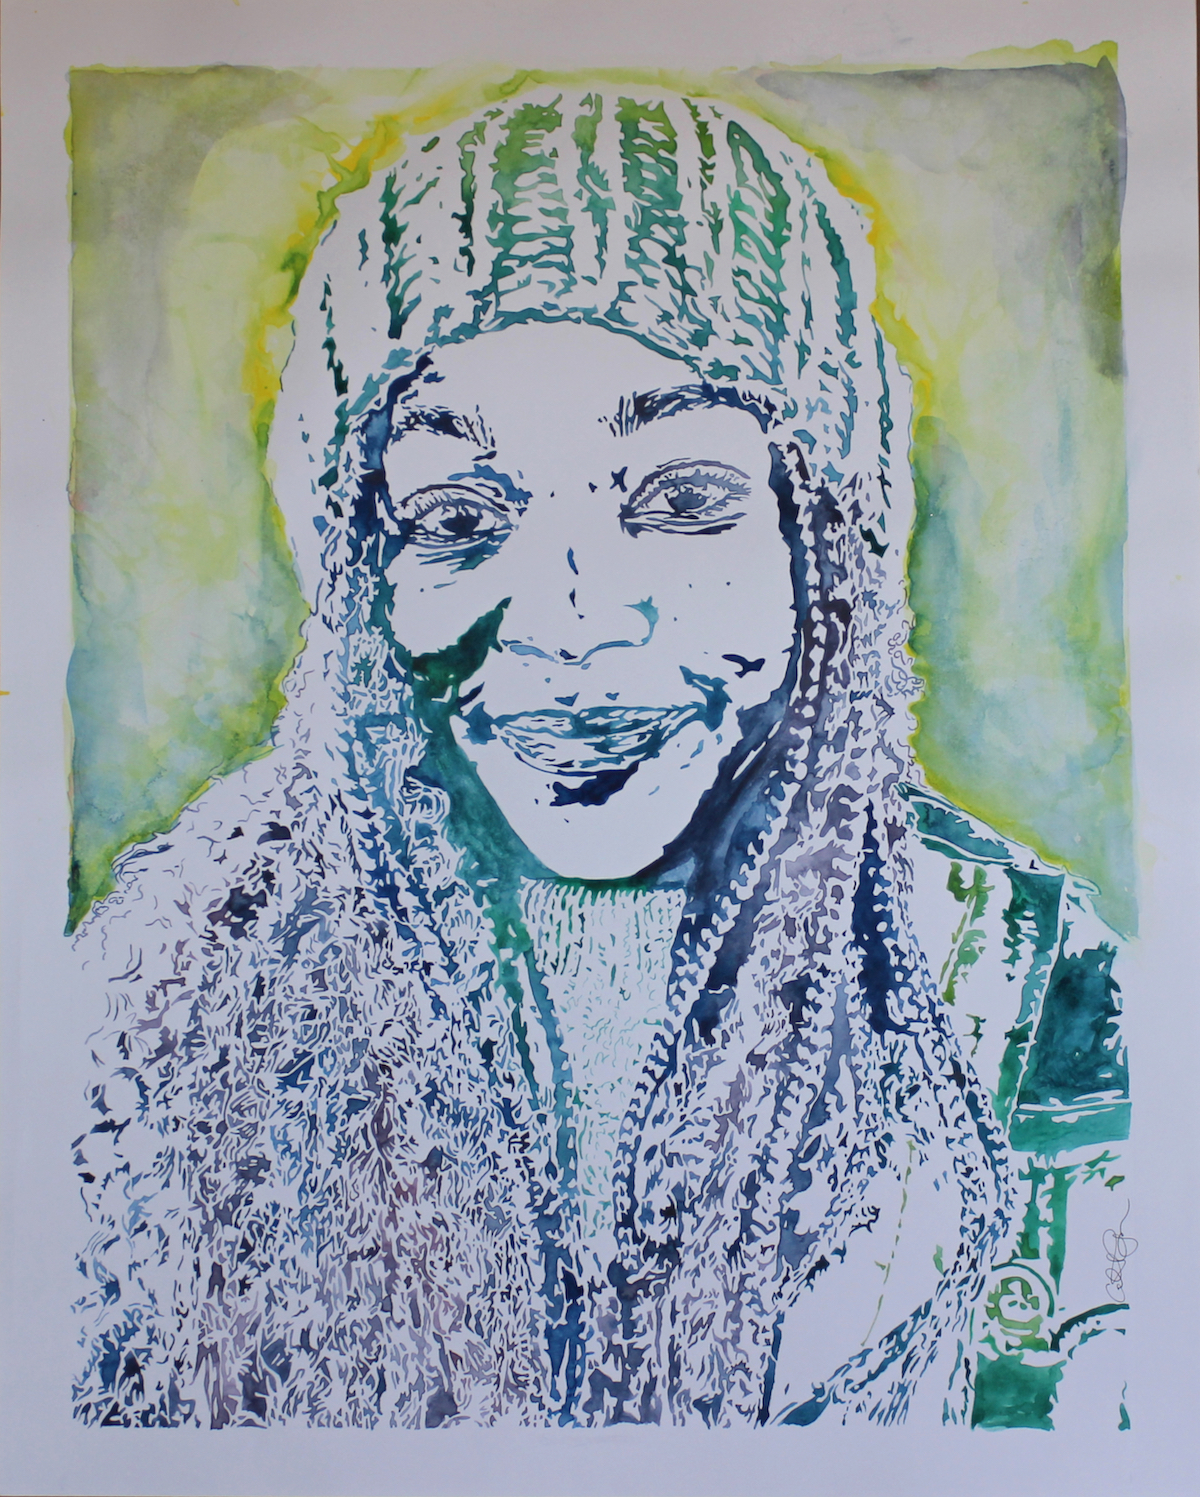 Watercolor painting of a young black woman wearing a hat with long hair covering her shoulders